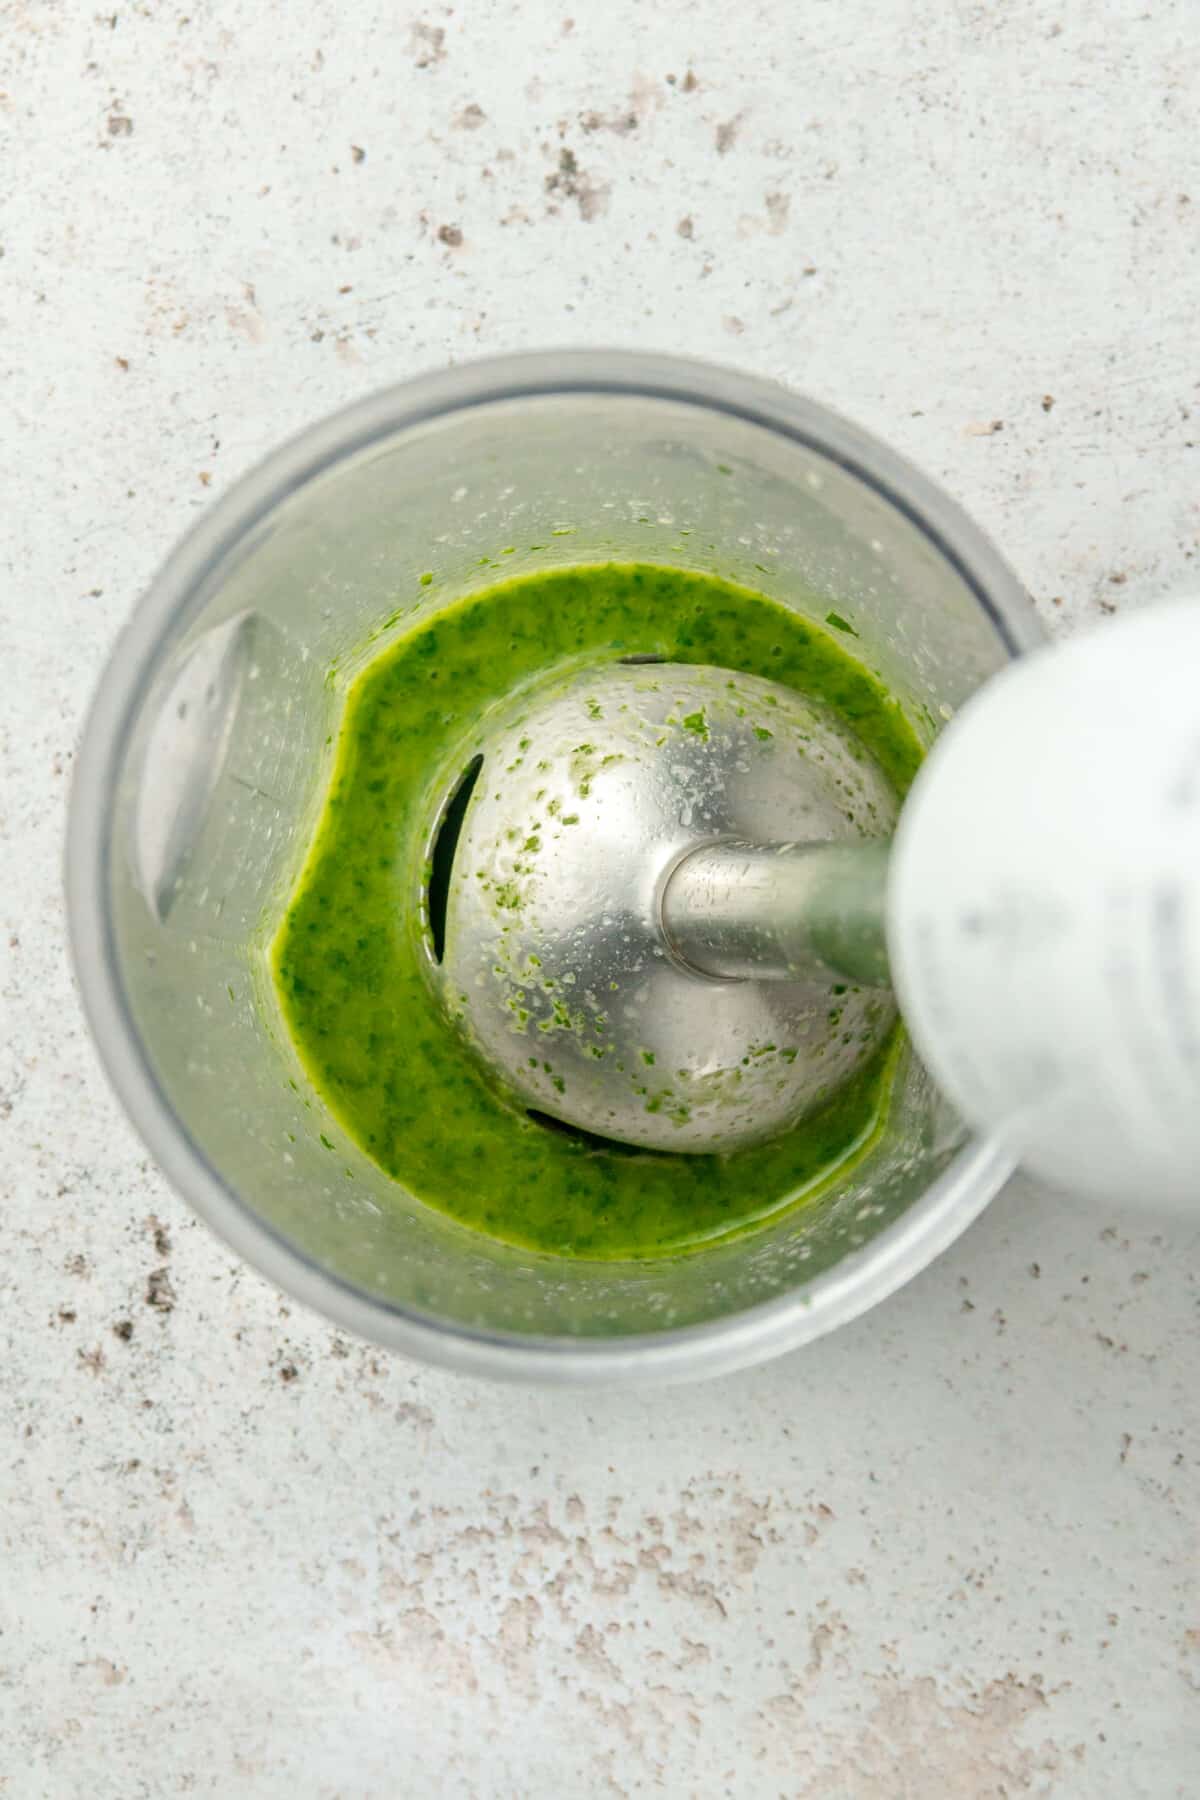 A coriander lime sauce is shown in a blender beaker with an immersion blender on a light grey colored surface.